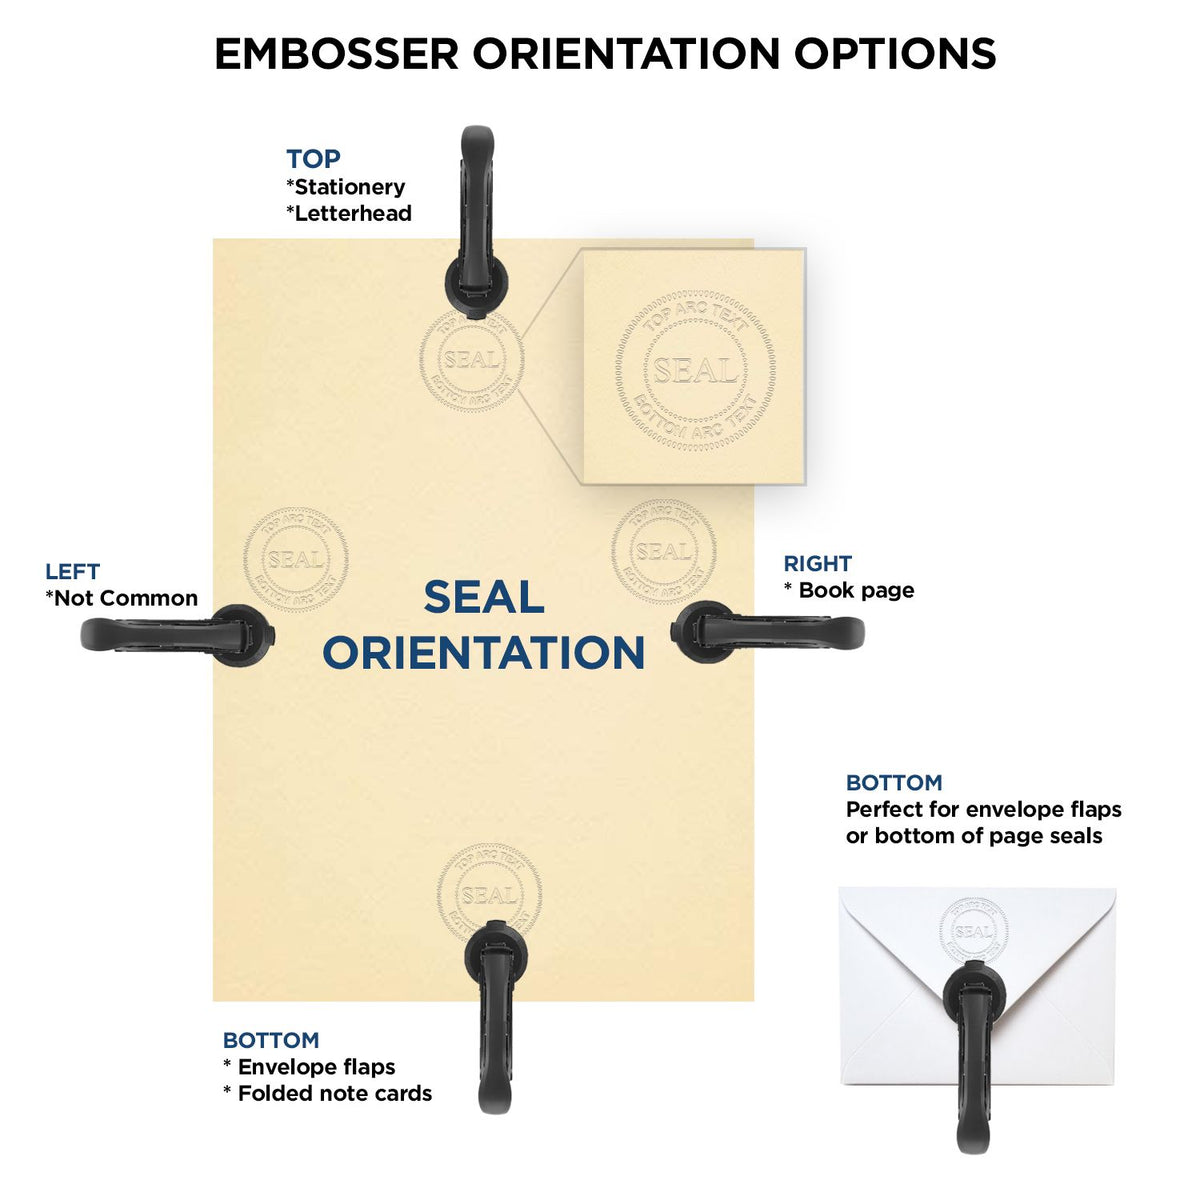 An infographic for the Heavy Duty Cast Iron Alaska Architect Embosser showing embosser orientation, this is showing examples of a top, bottom, right and left insert.